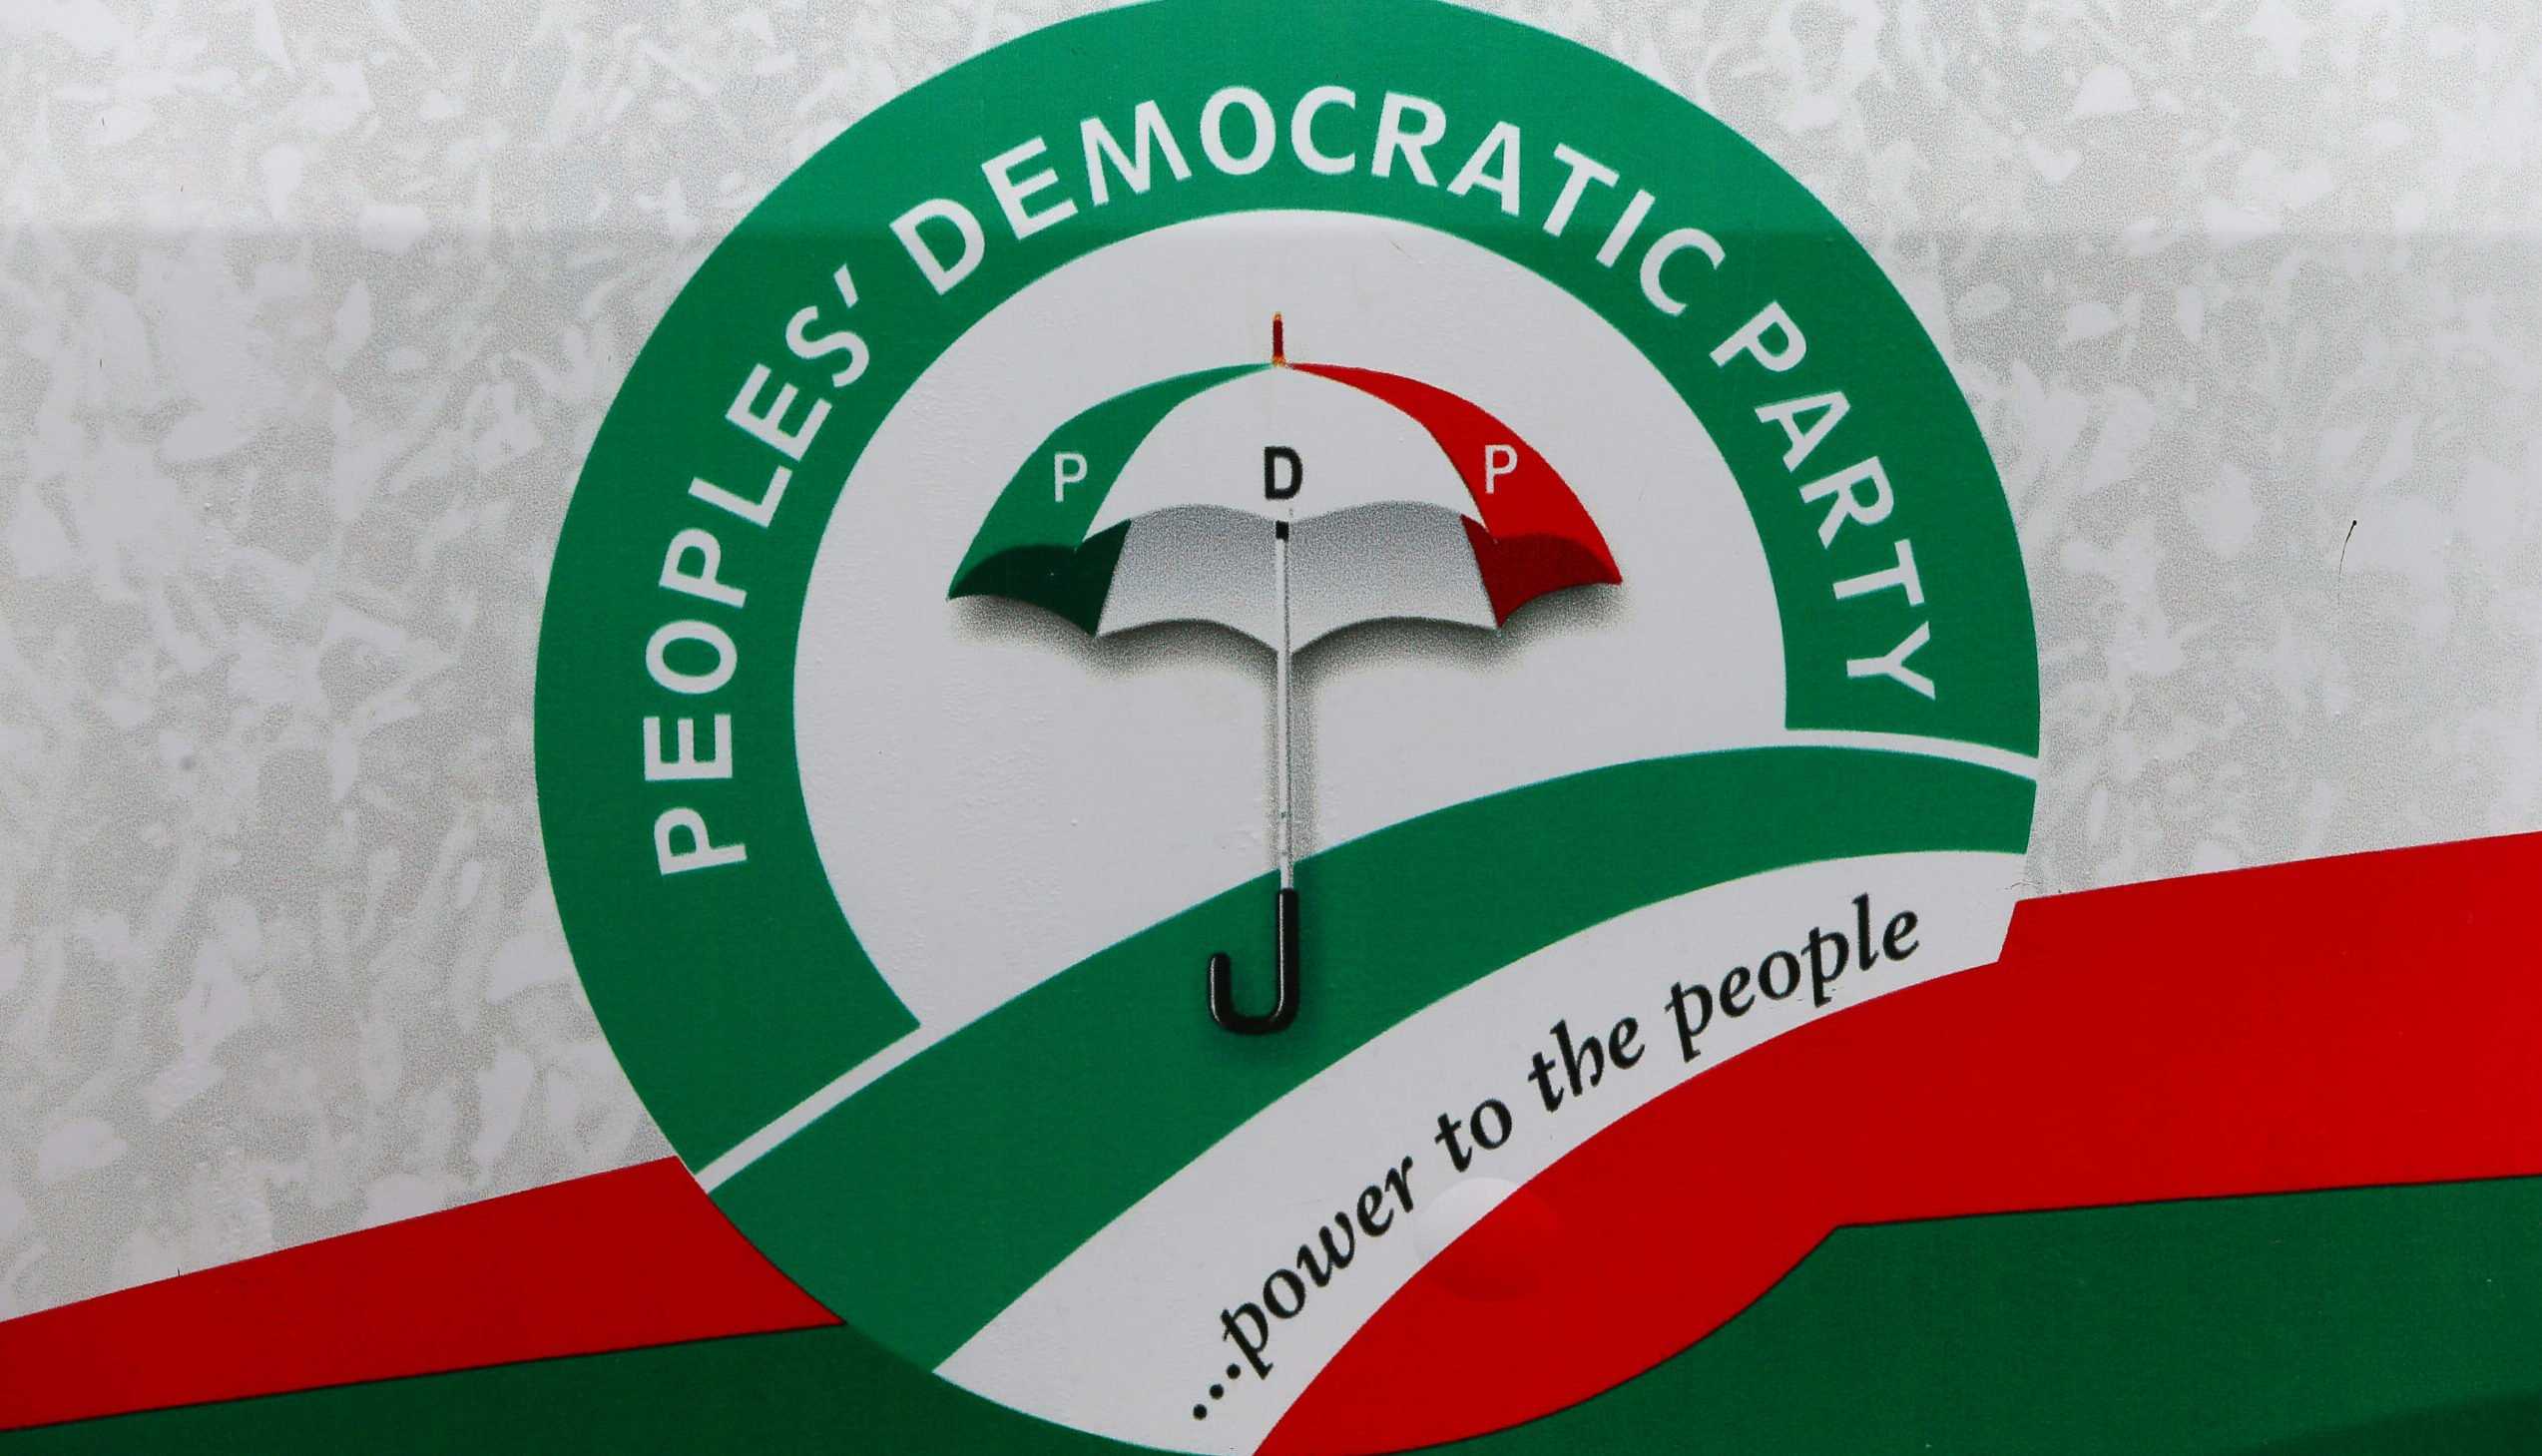 PDP Dumps Zoning - Throws Presidential Ticket Open